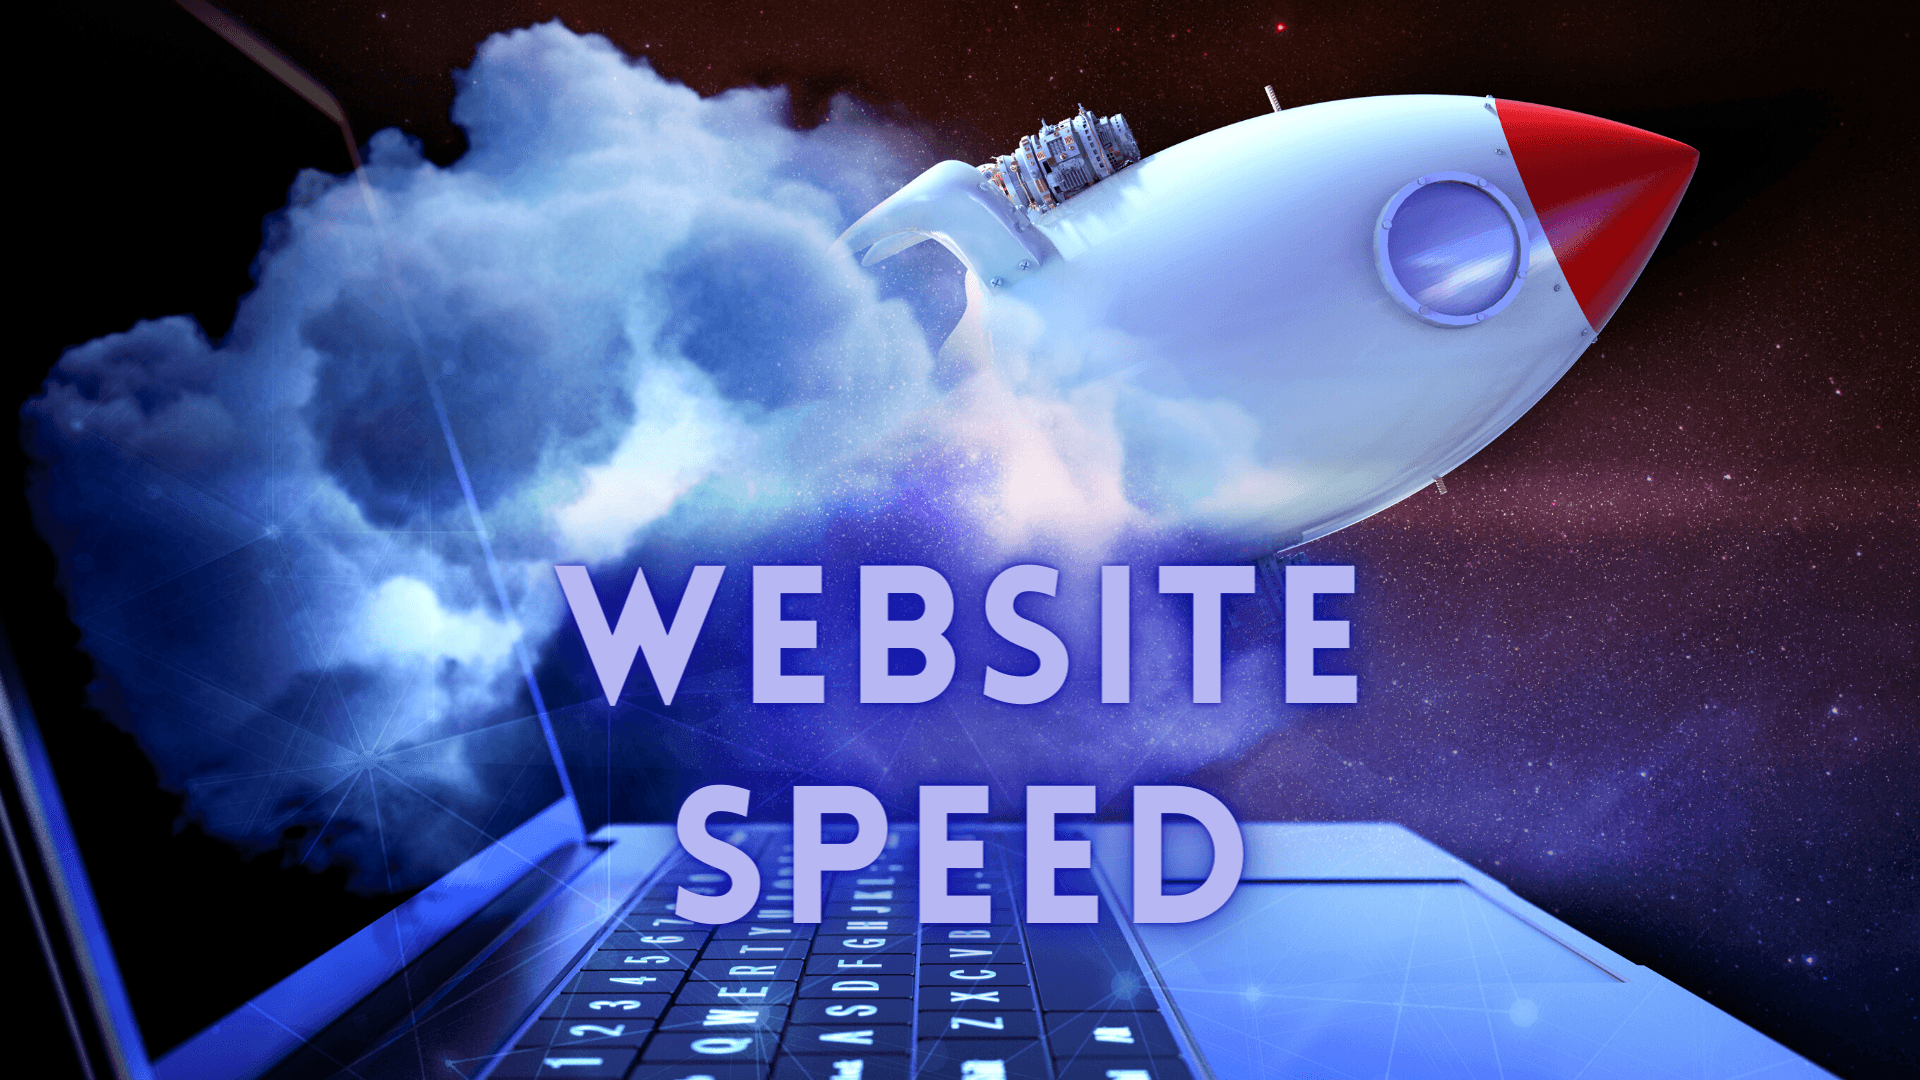 How does website speed affect business revenue?